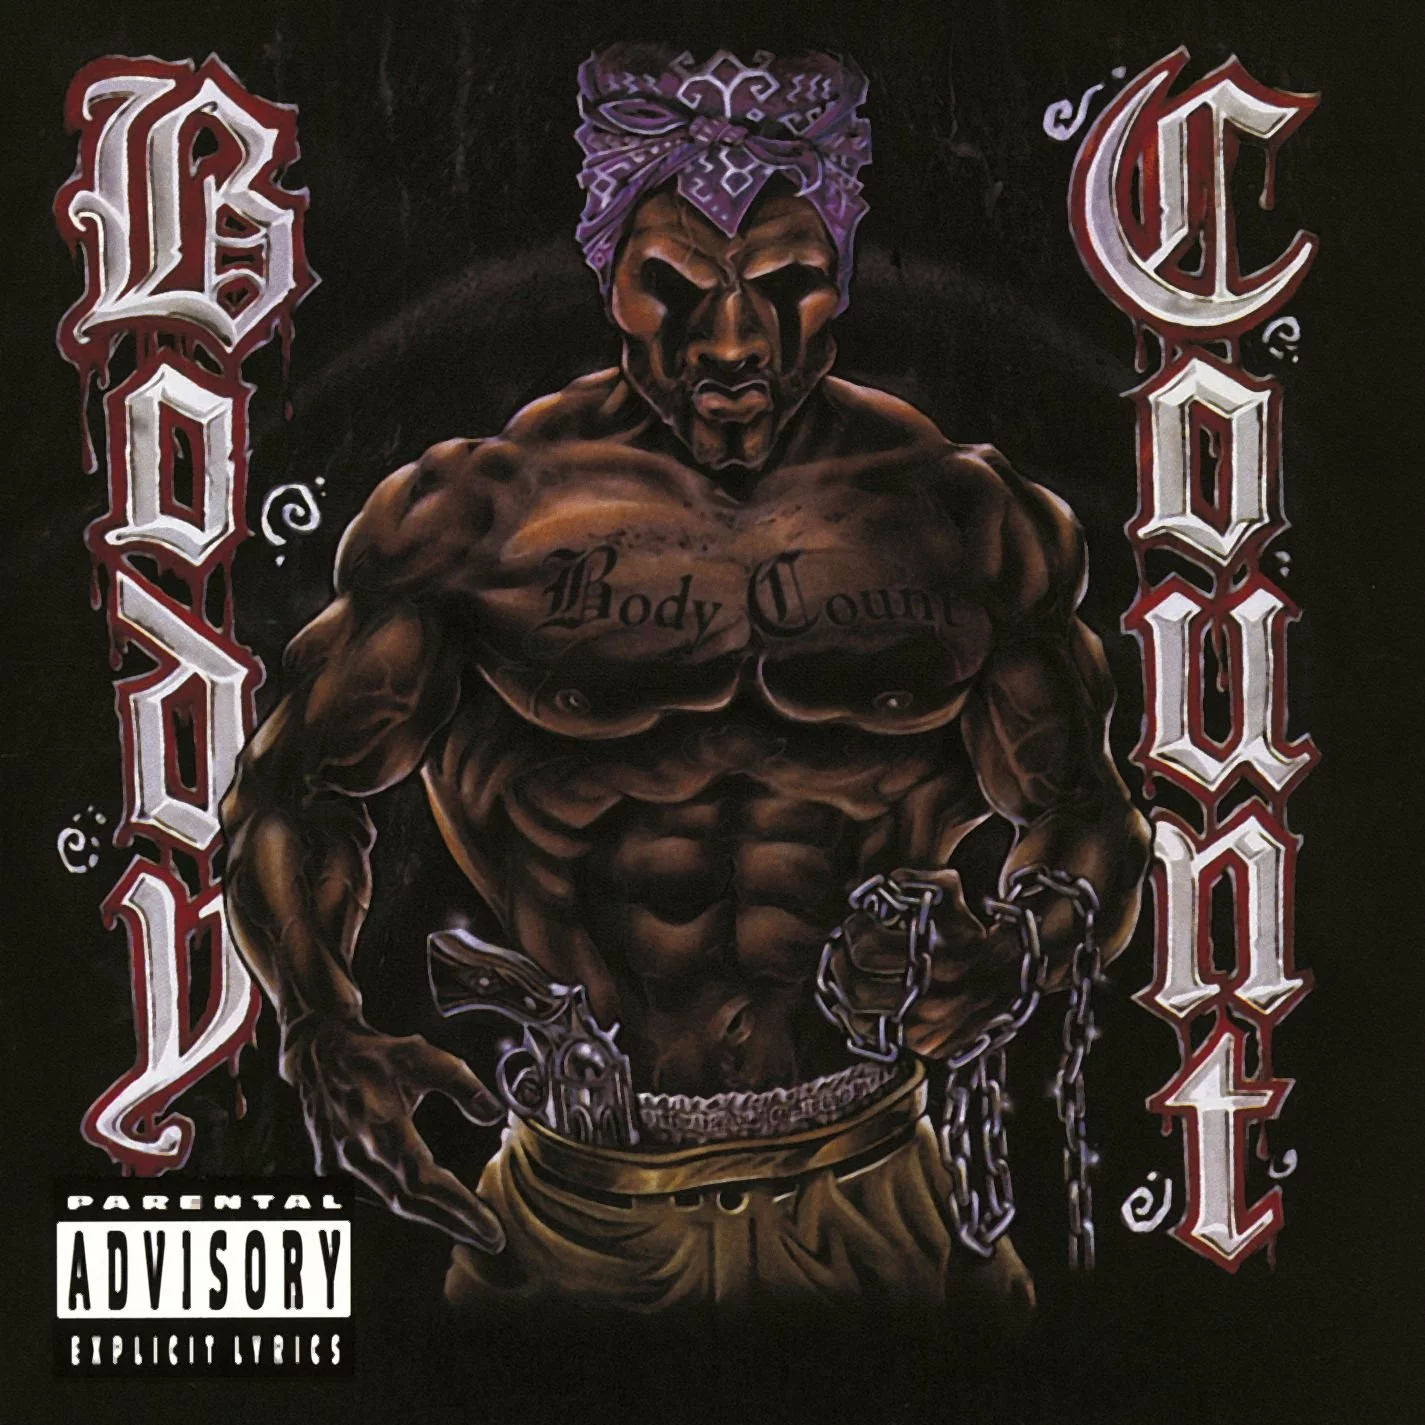 BODY COUNT - Body Count [CD]